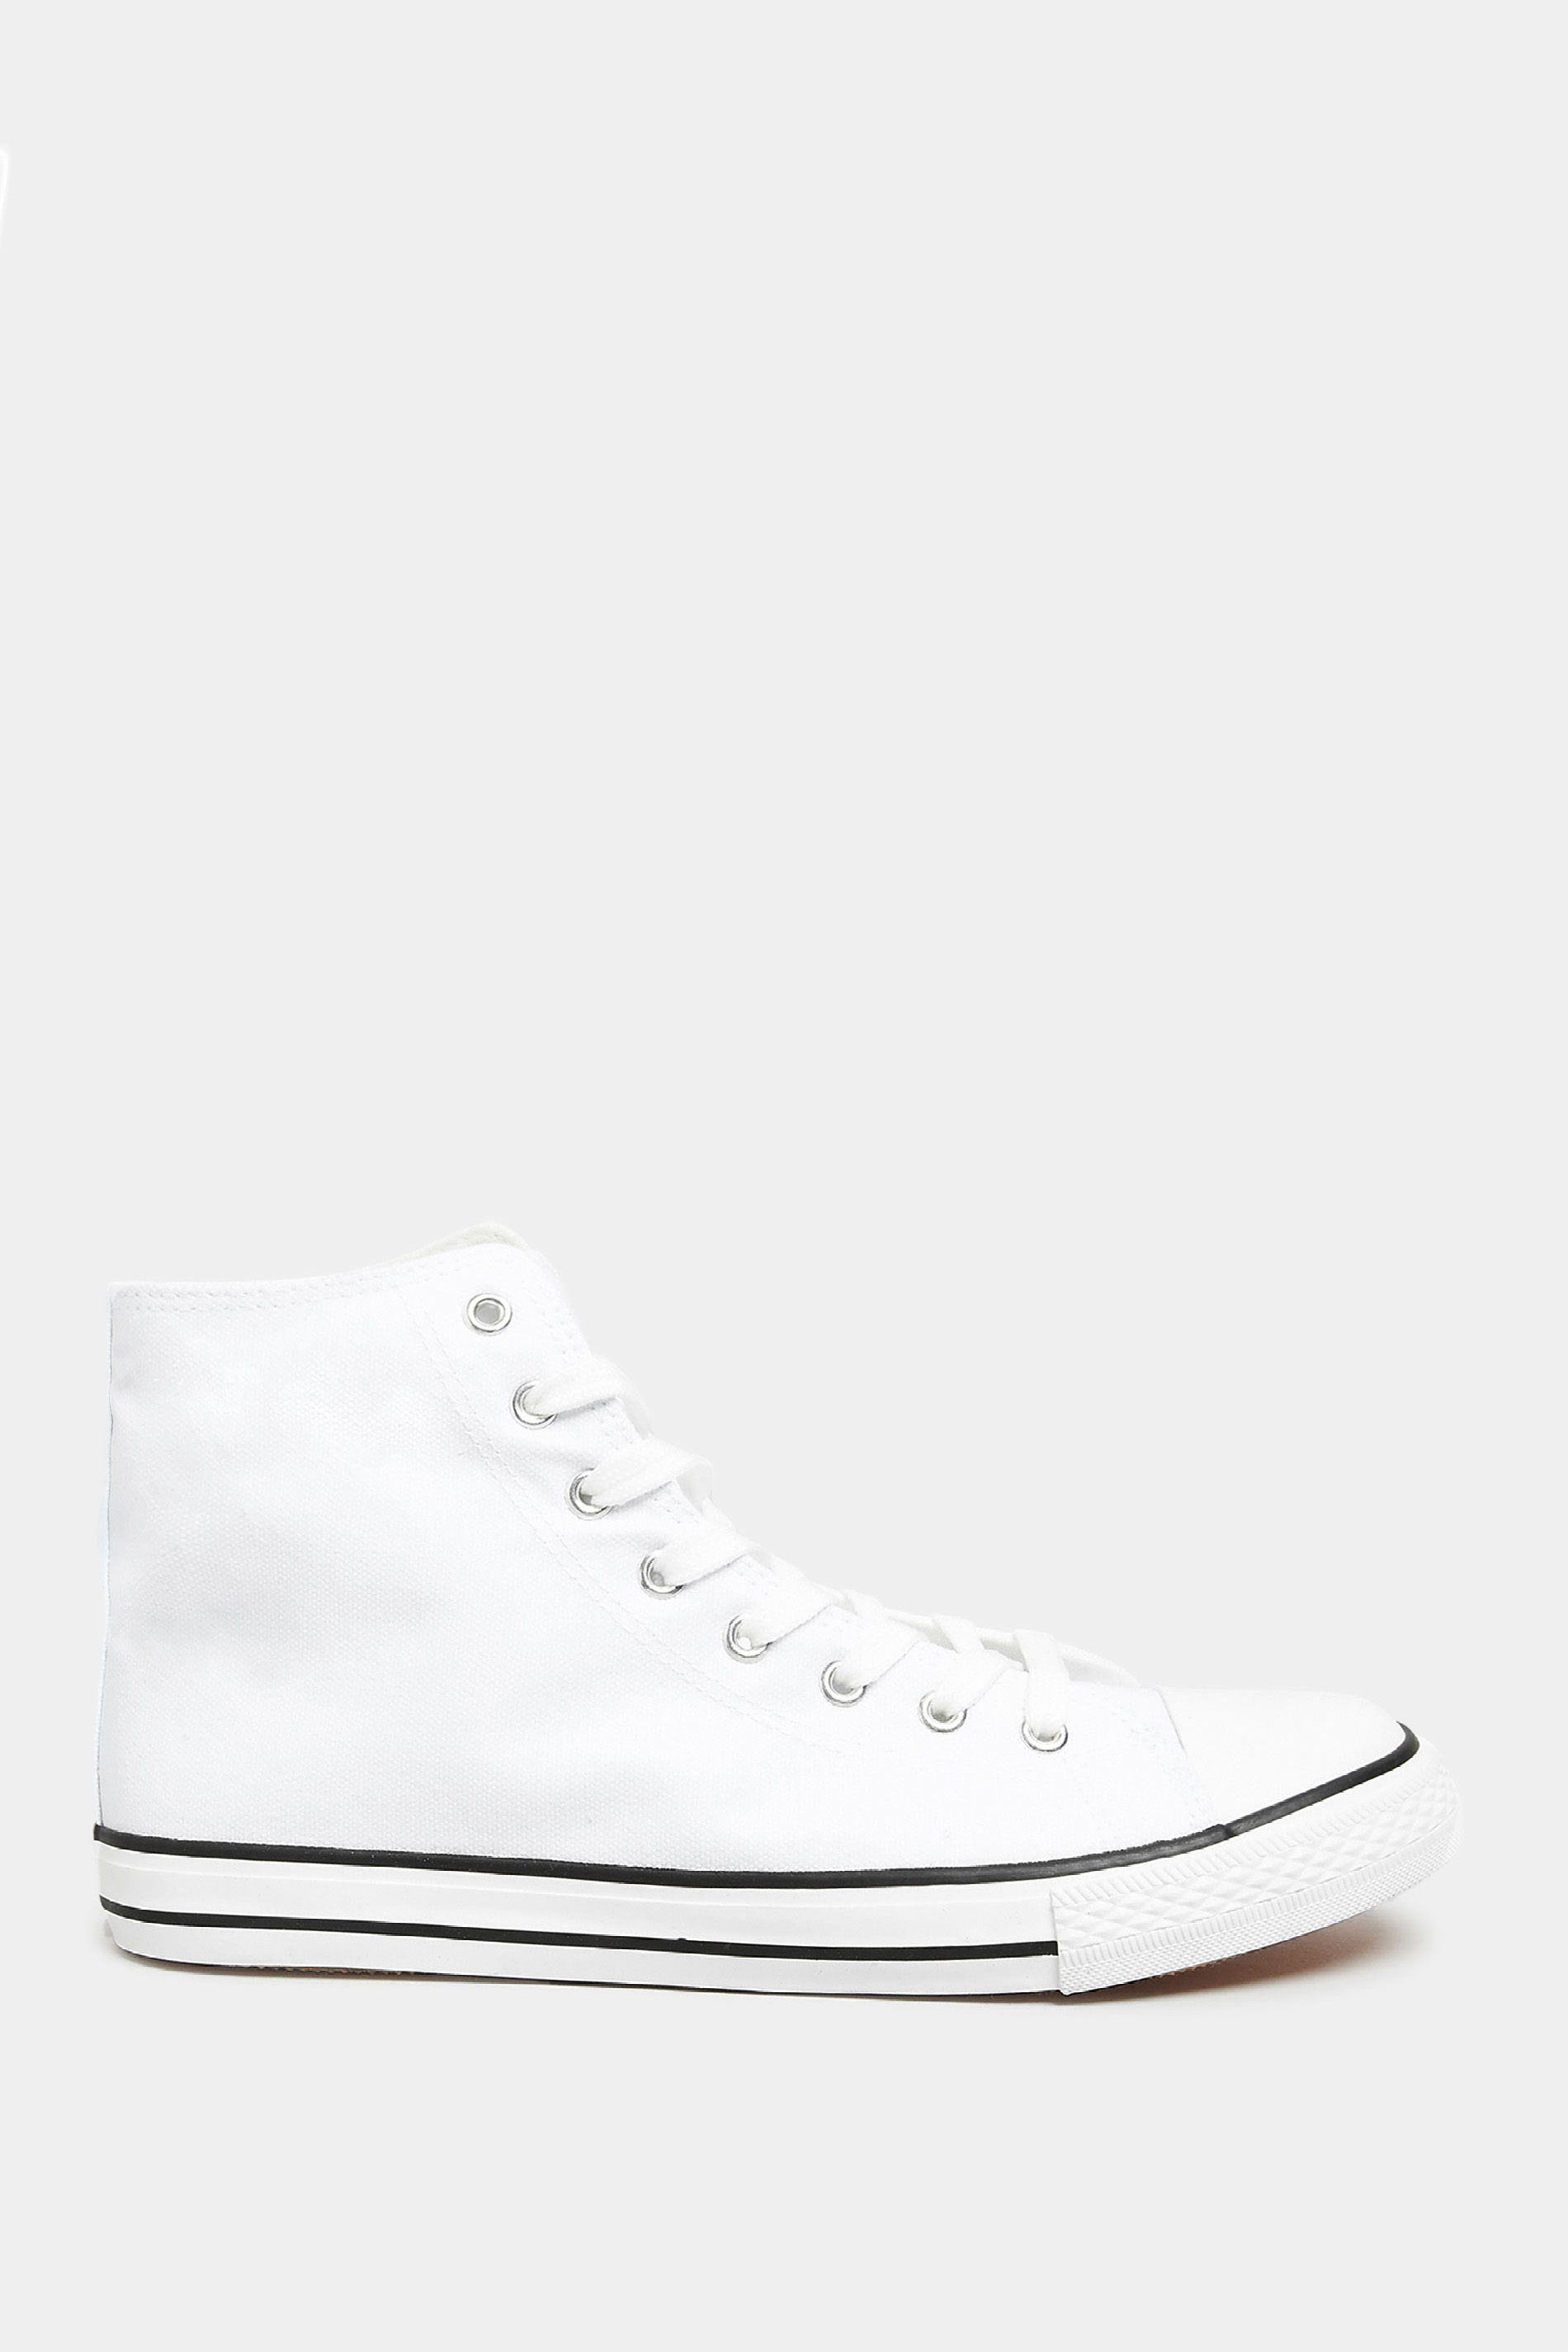 LTS White Canvas High Top Trainers In Standard Fit | Long Tall Sally 3